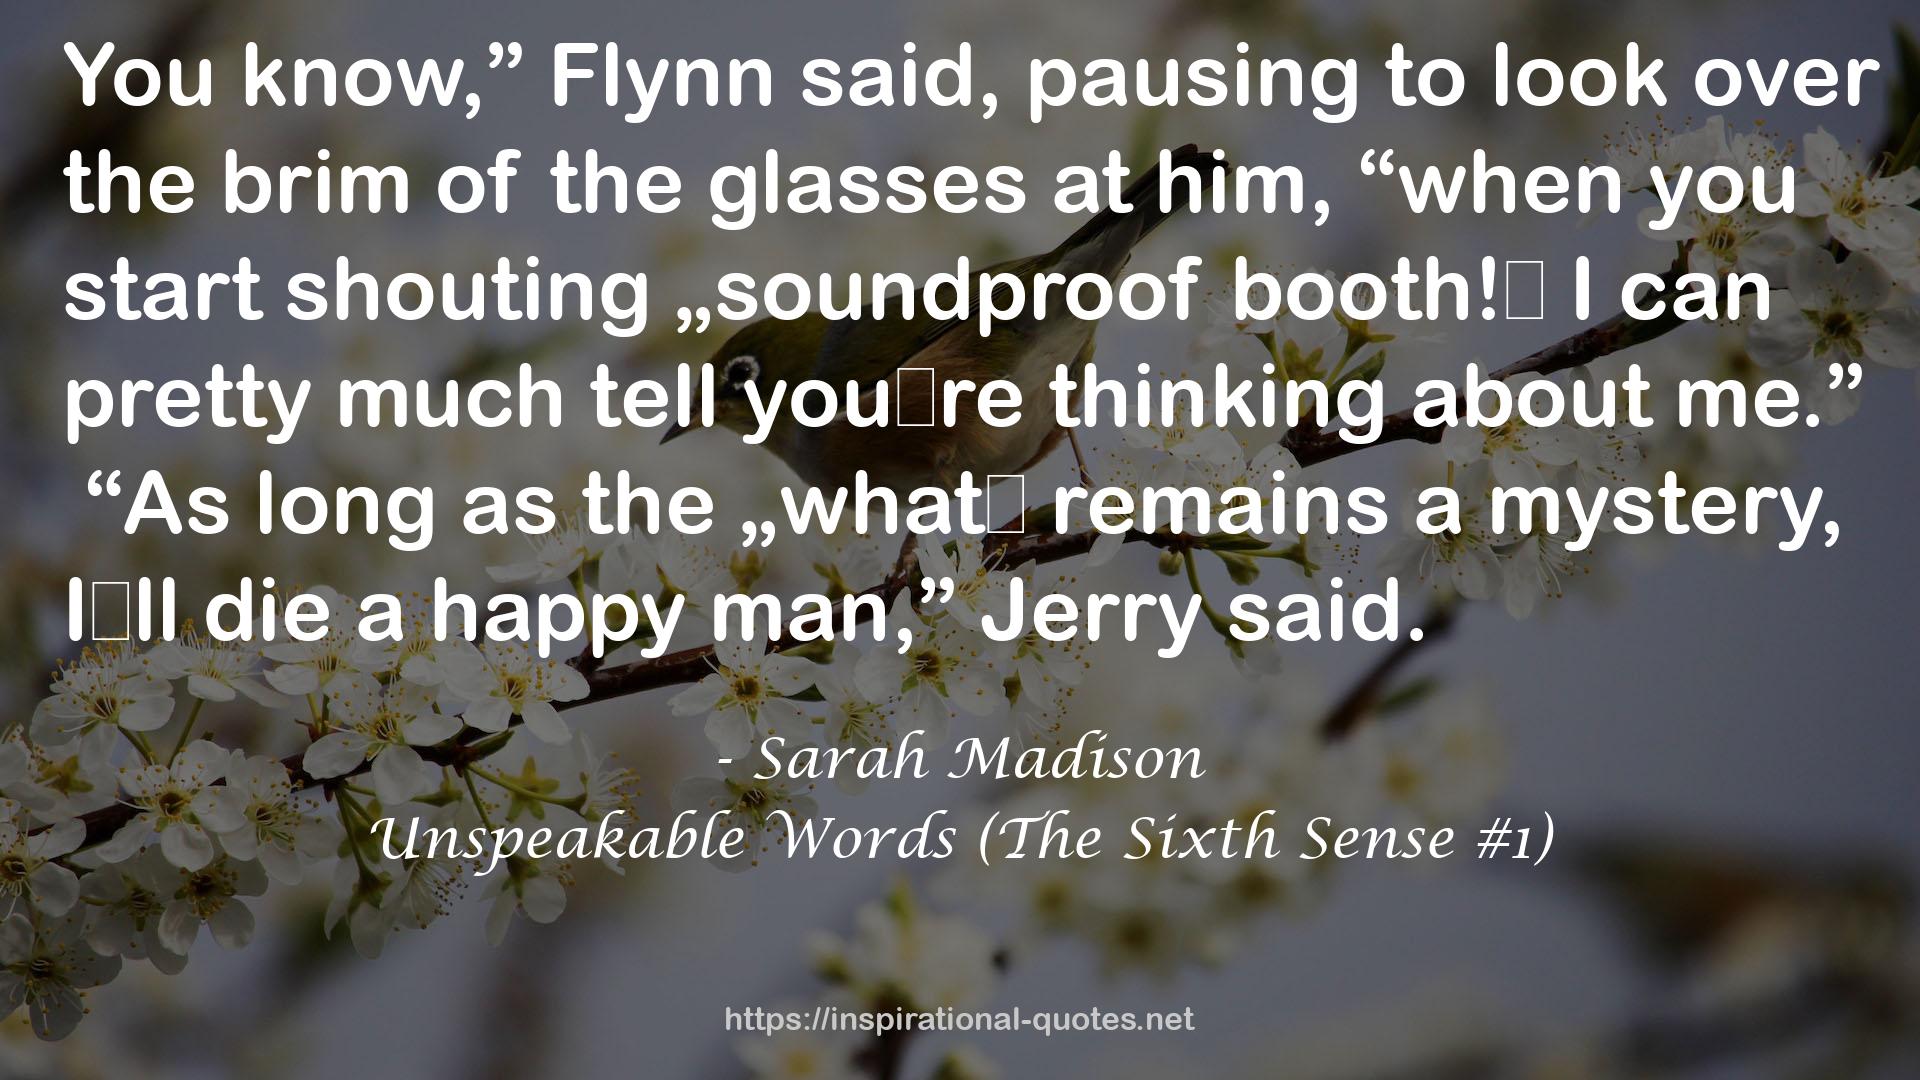 Unspeakable Words (The Sixth Sense #1) QUOTES